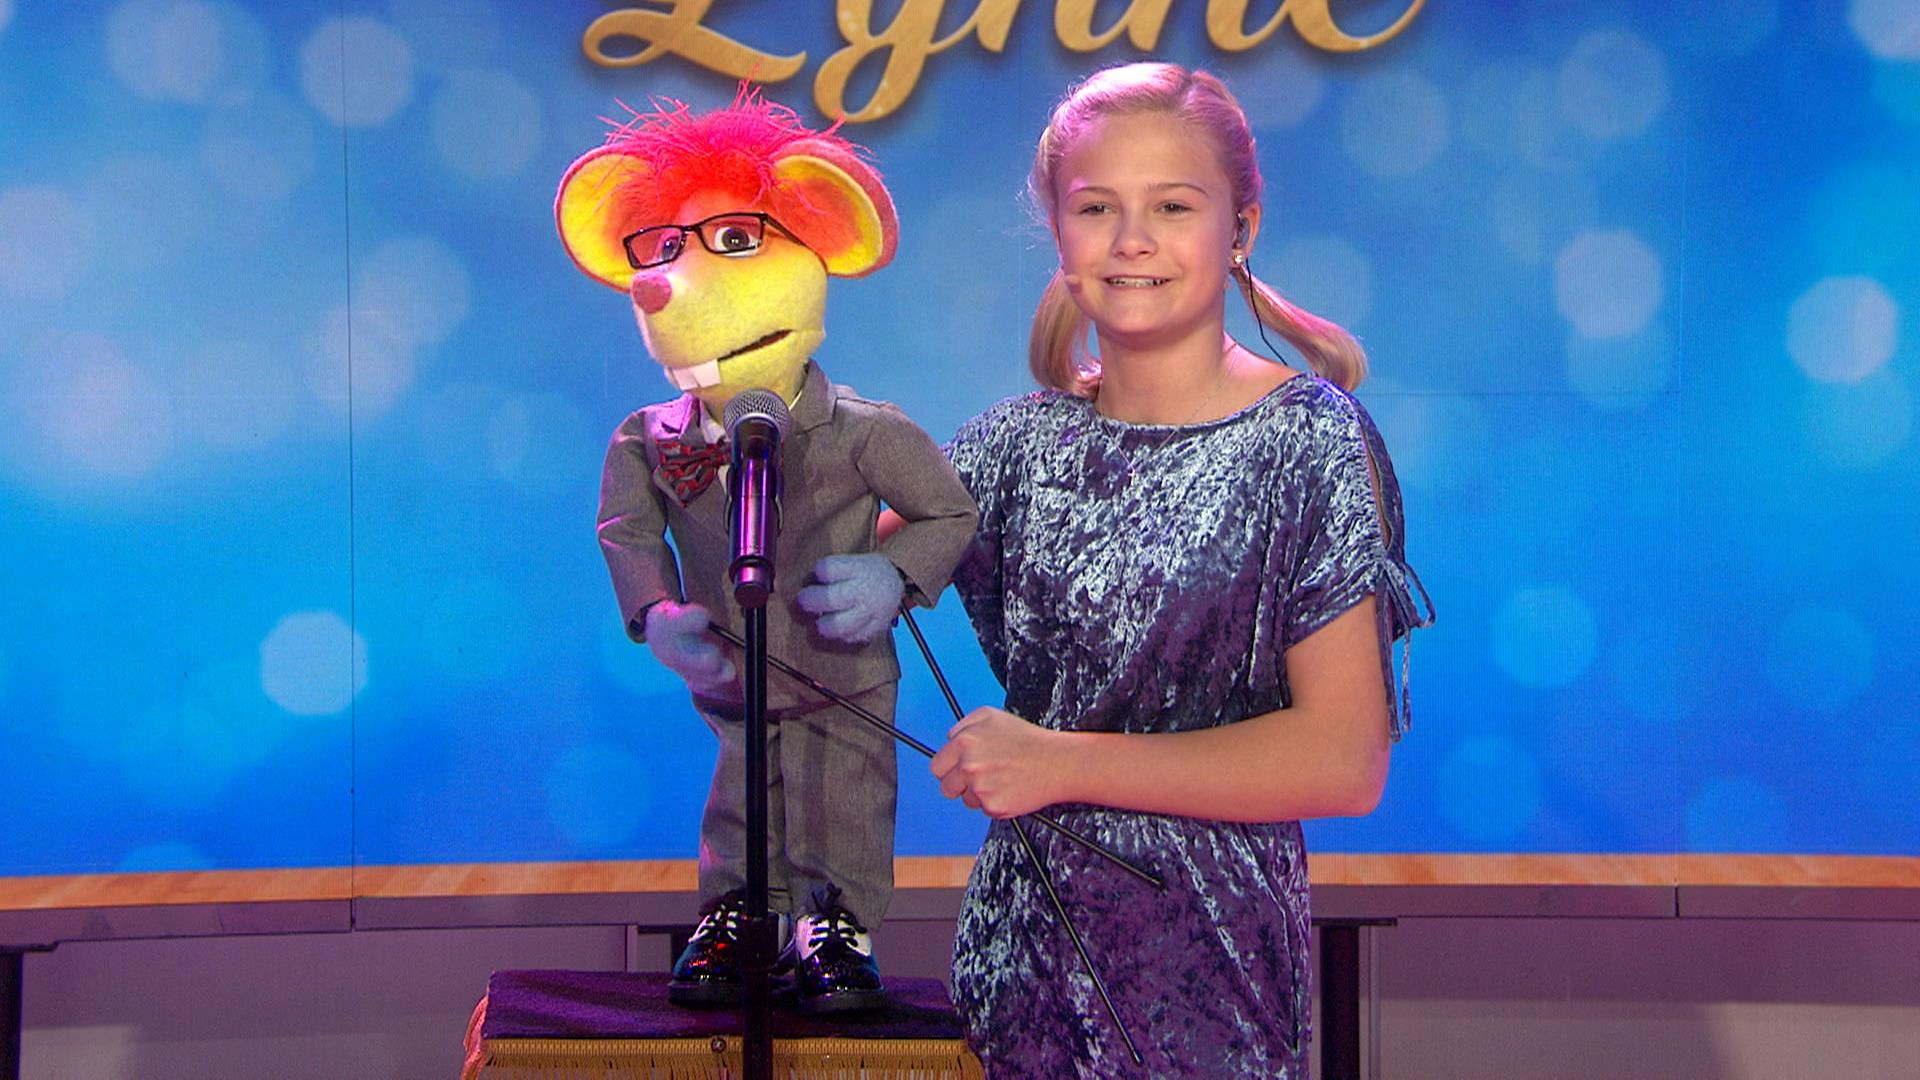 See 'AGT' winner Darci Lynne Farmer do her ventriloquist act on TODAY